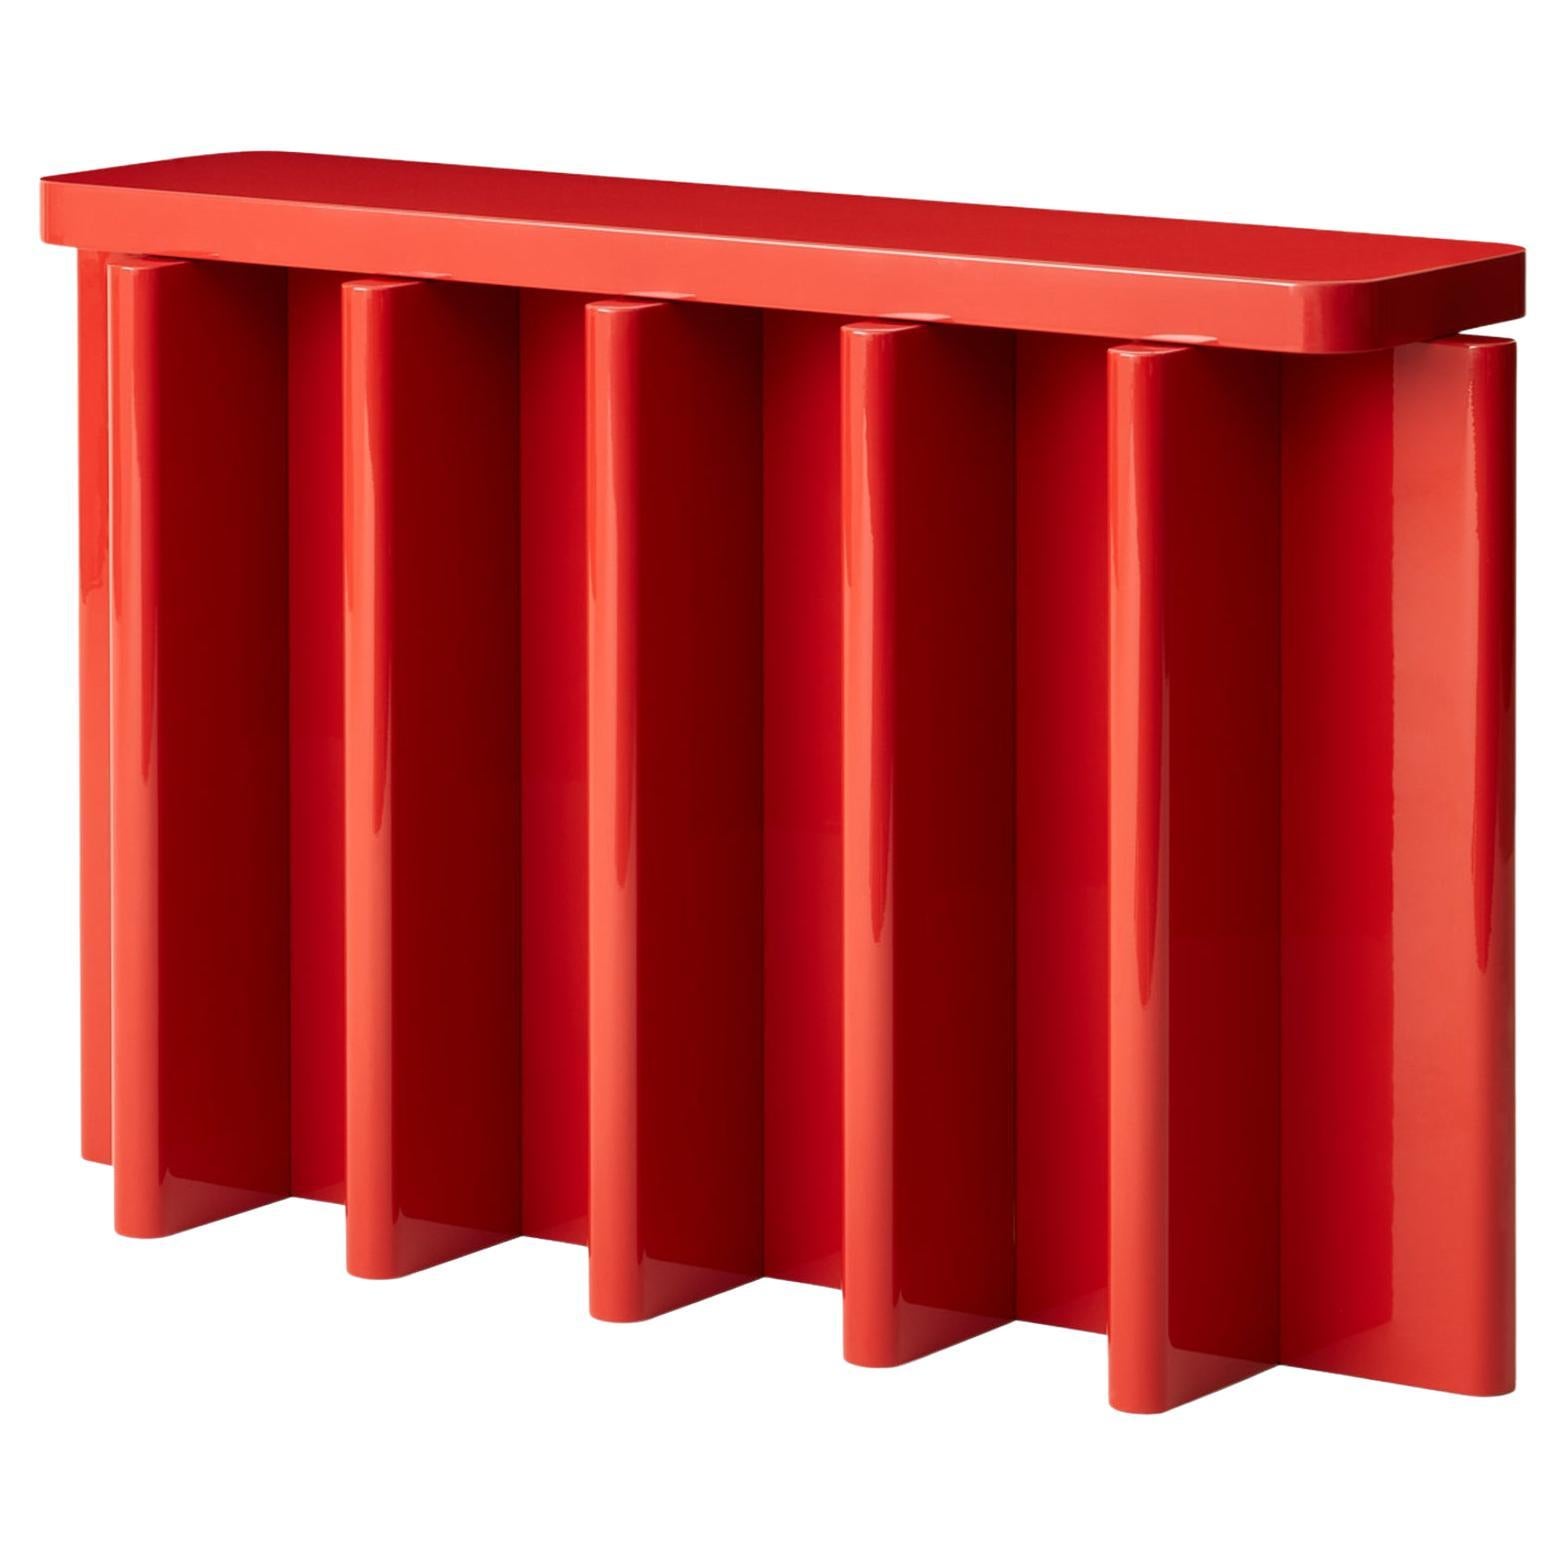 Red Spina C5.1 Console Table by Cara Davide